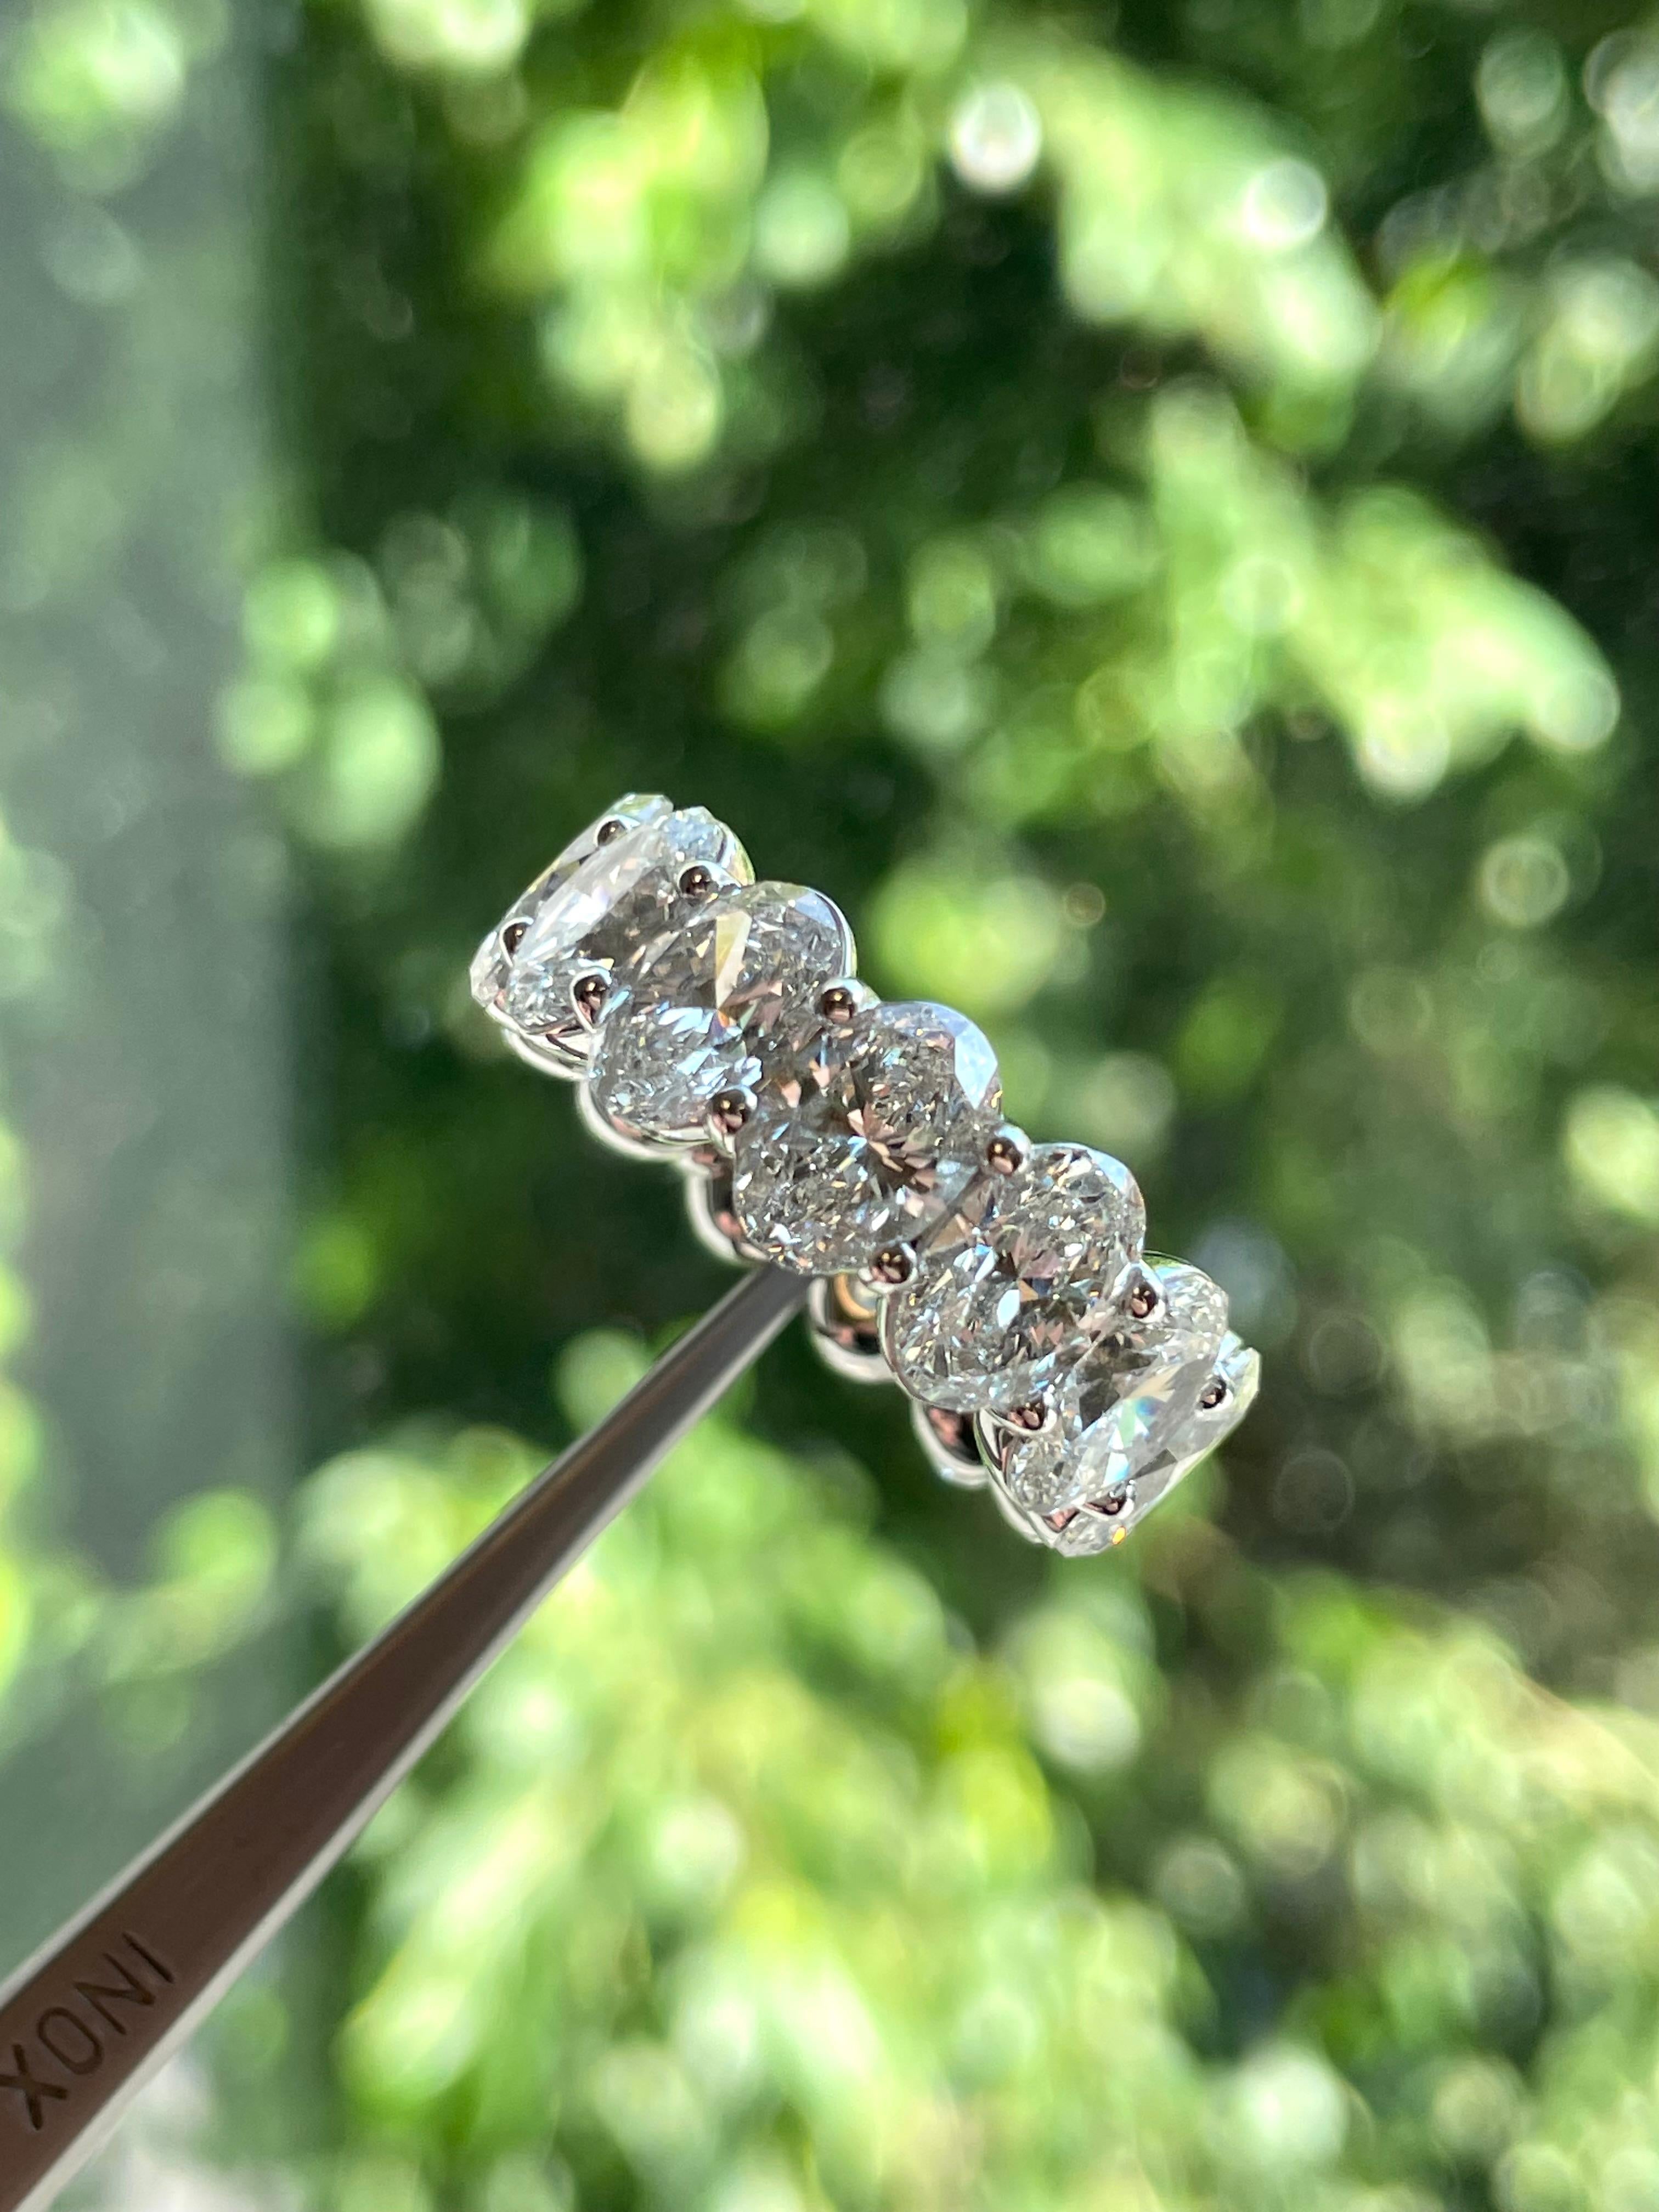 Extraordinary 13.09 Carat Oval Eternity Band

Setting:
Platinum

Center Stones:
13.09 Ctw Oval Diamonds x 13 Stones
Color: F-G
Clarity: SI1/SI2

If interested, please feel free to request certifications, thank you. 

•Free Worldwide Shipping
•100%